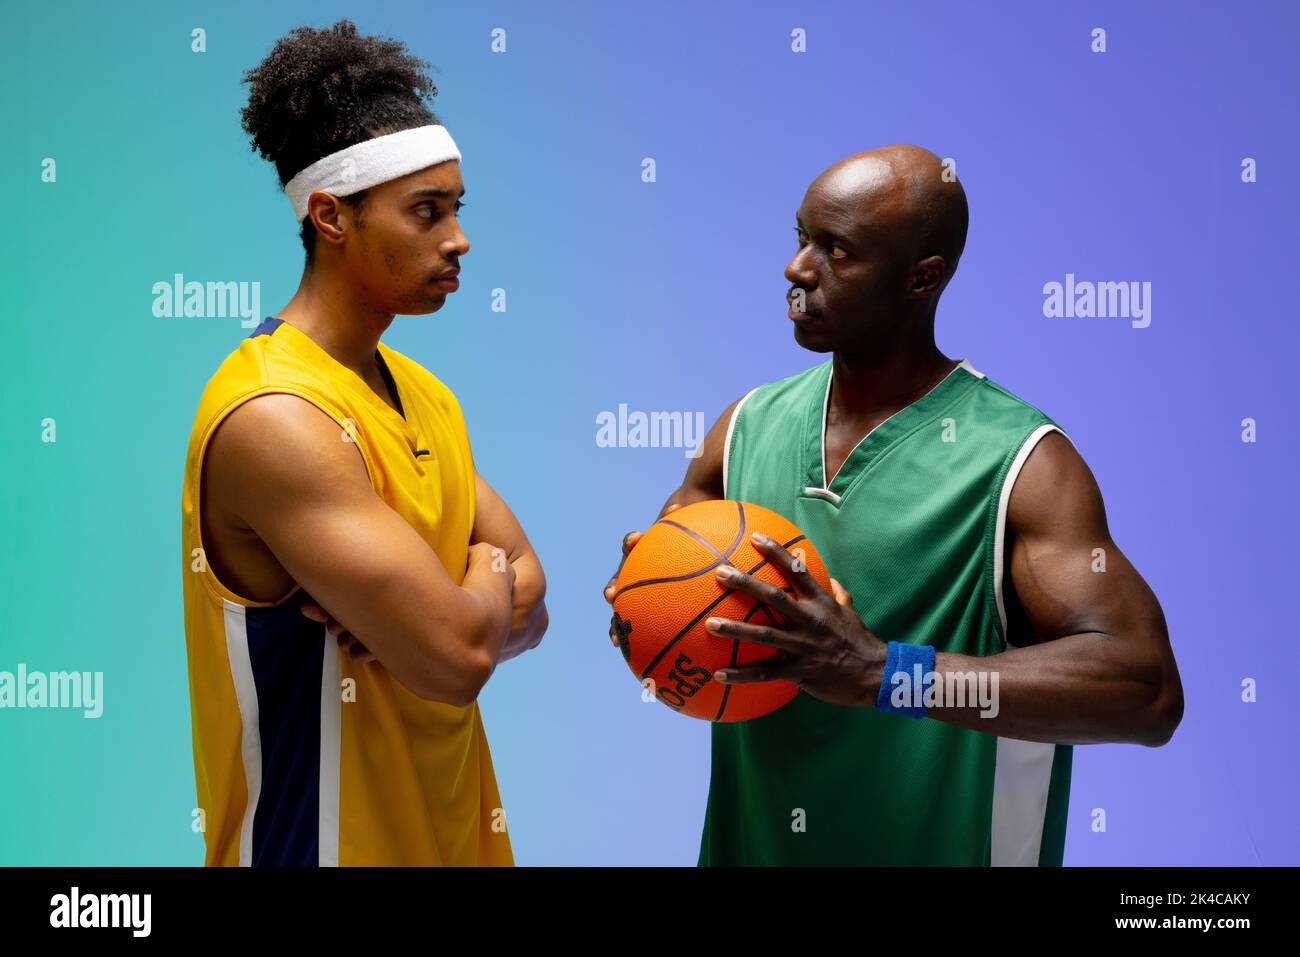 Image of two diverse basketball players facing each other on purple to green background. Sports and competition concept. Stock Photo